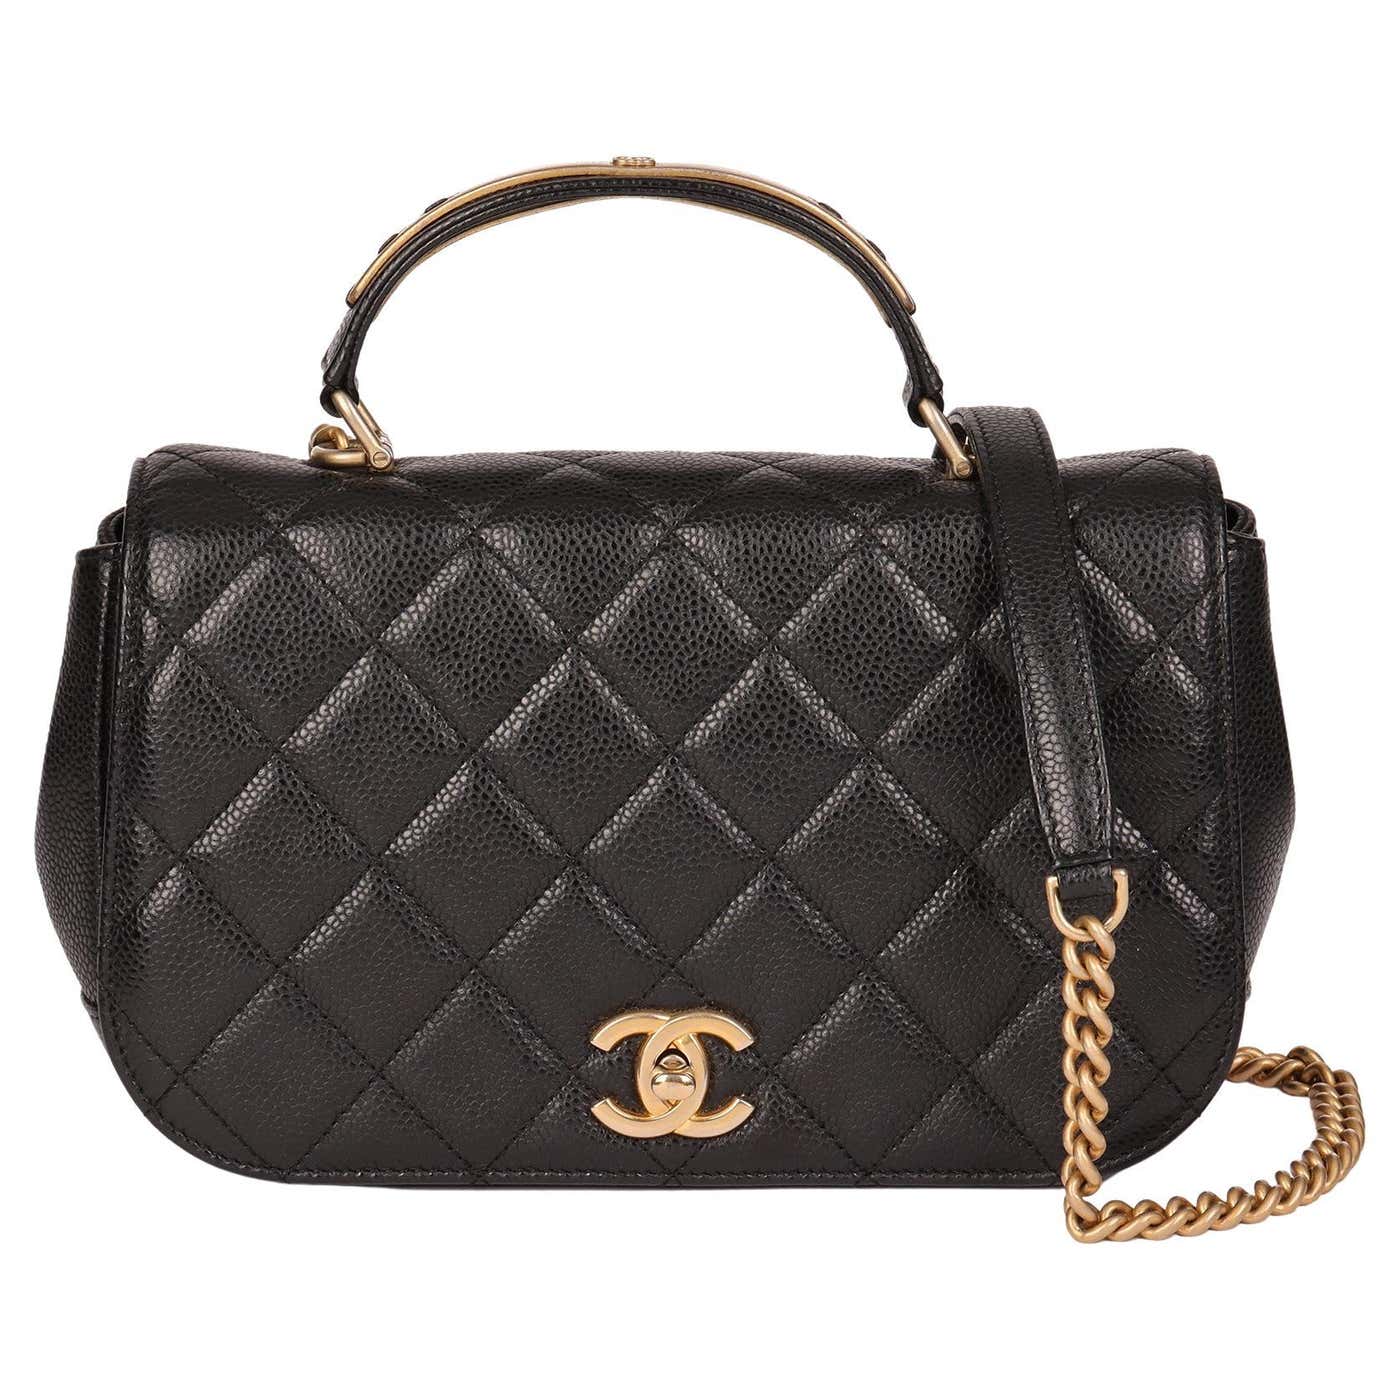 CHANEL Black Quilted Caviar Leather Medium Classic Top Handle Flap Bag ...